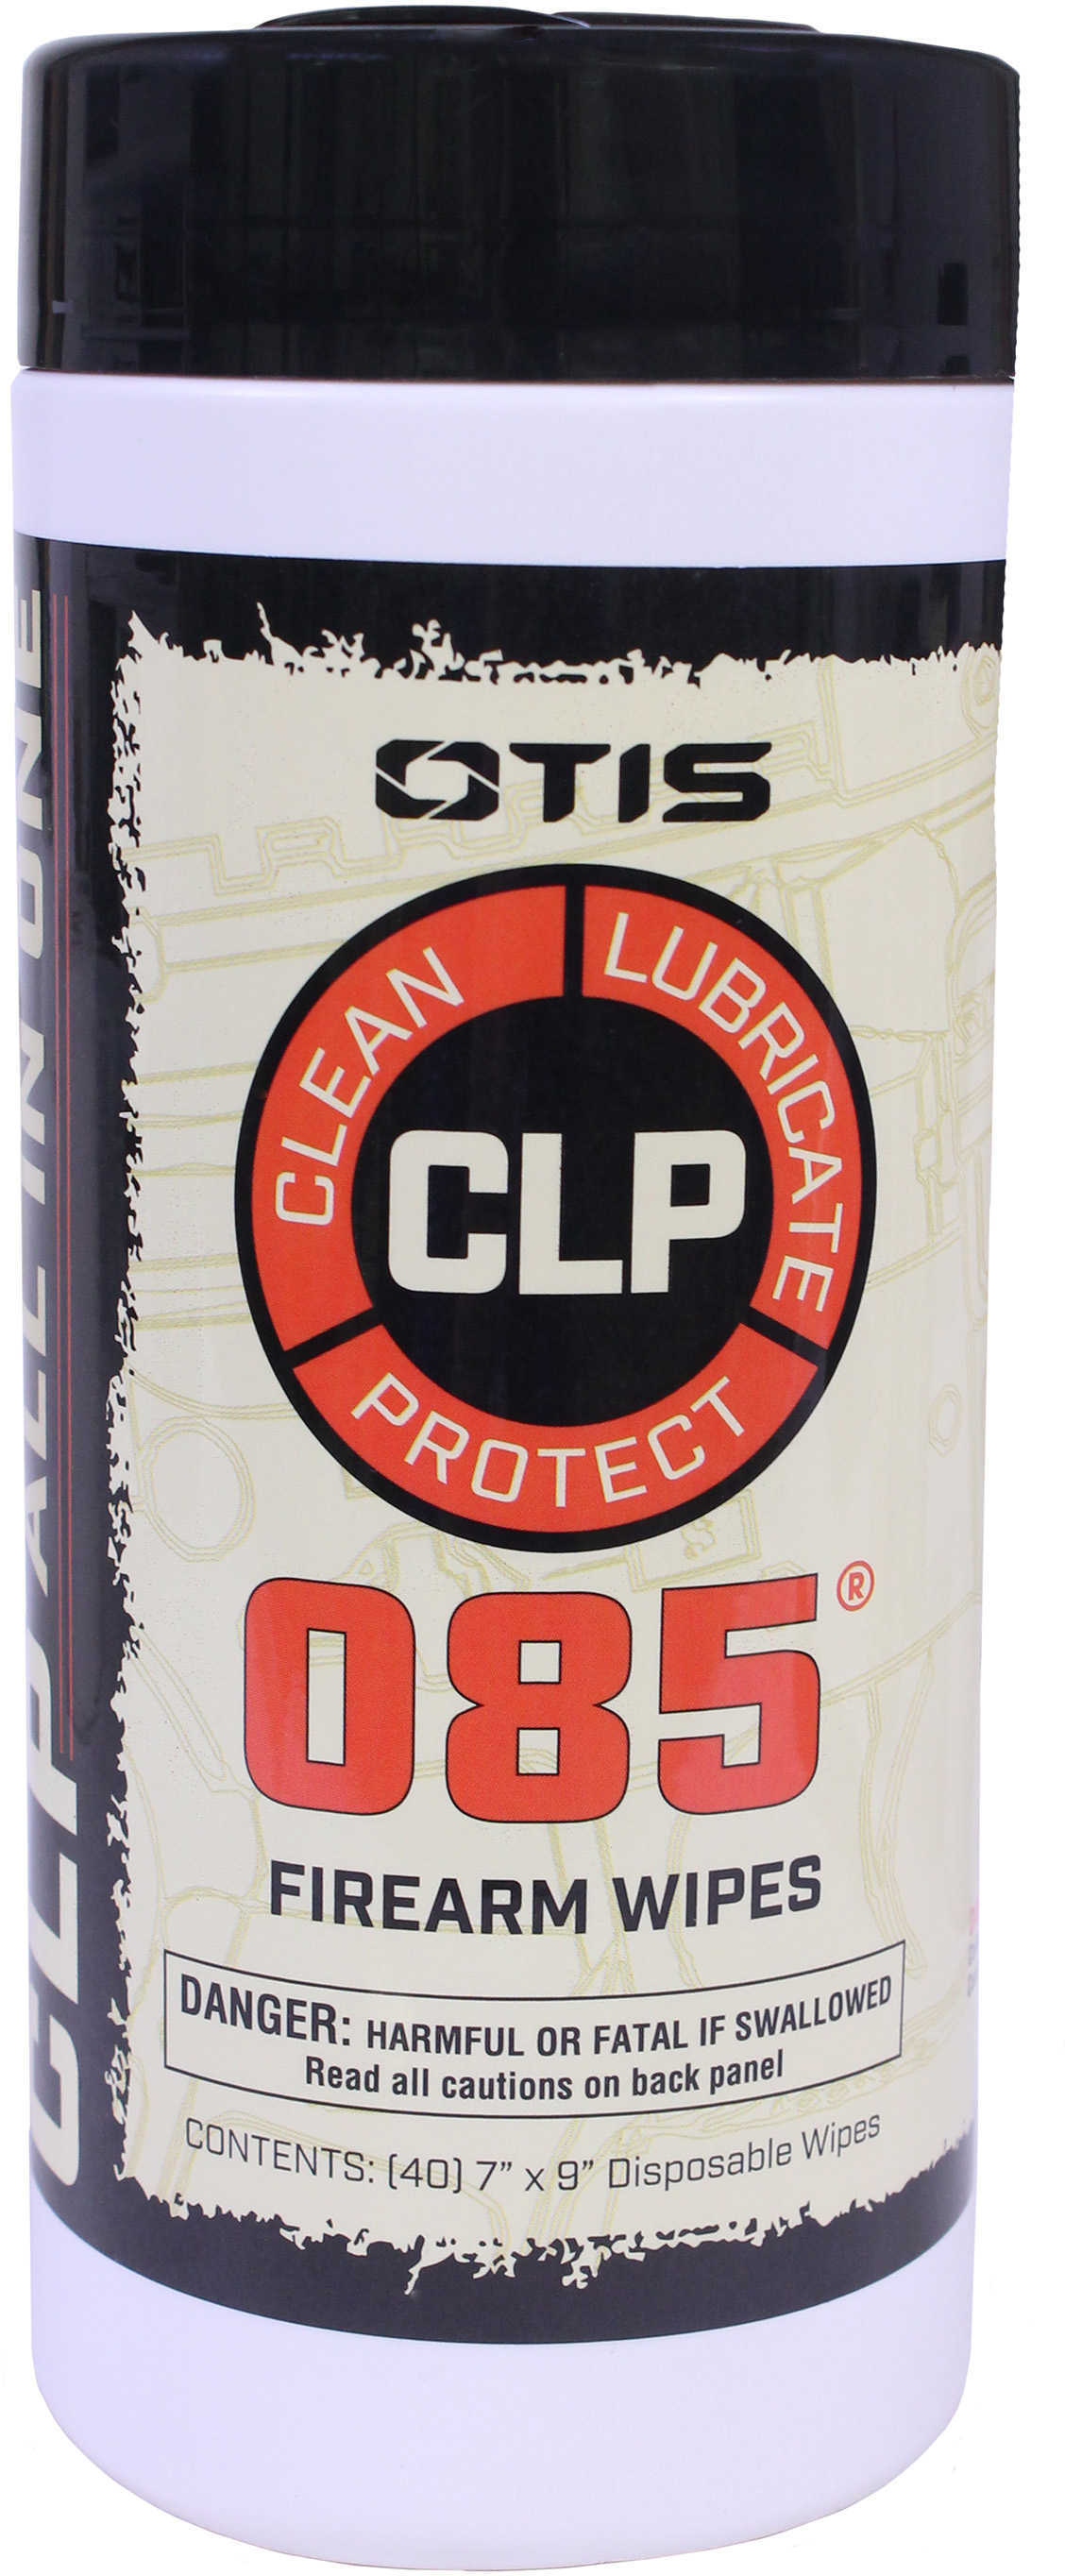 Otis Technologies O85 CLP Wipes 40 Per Canister